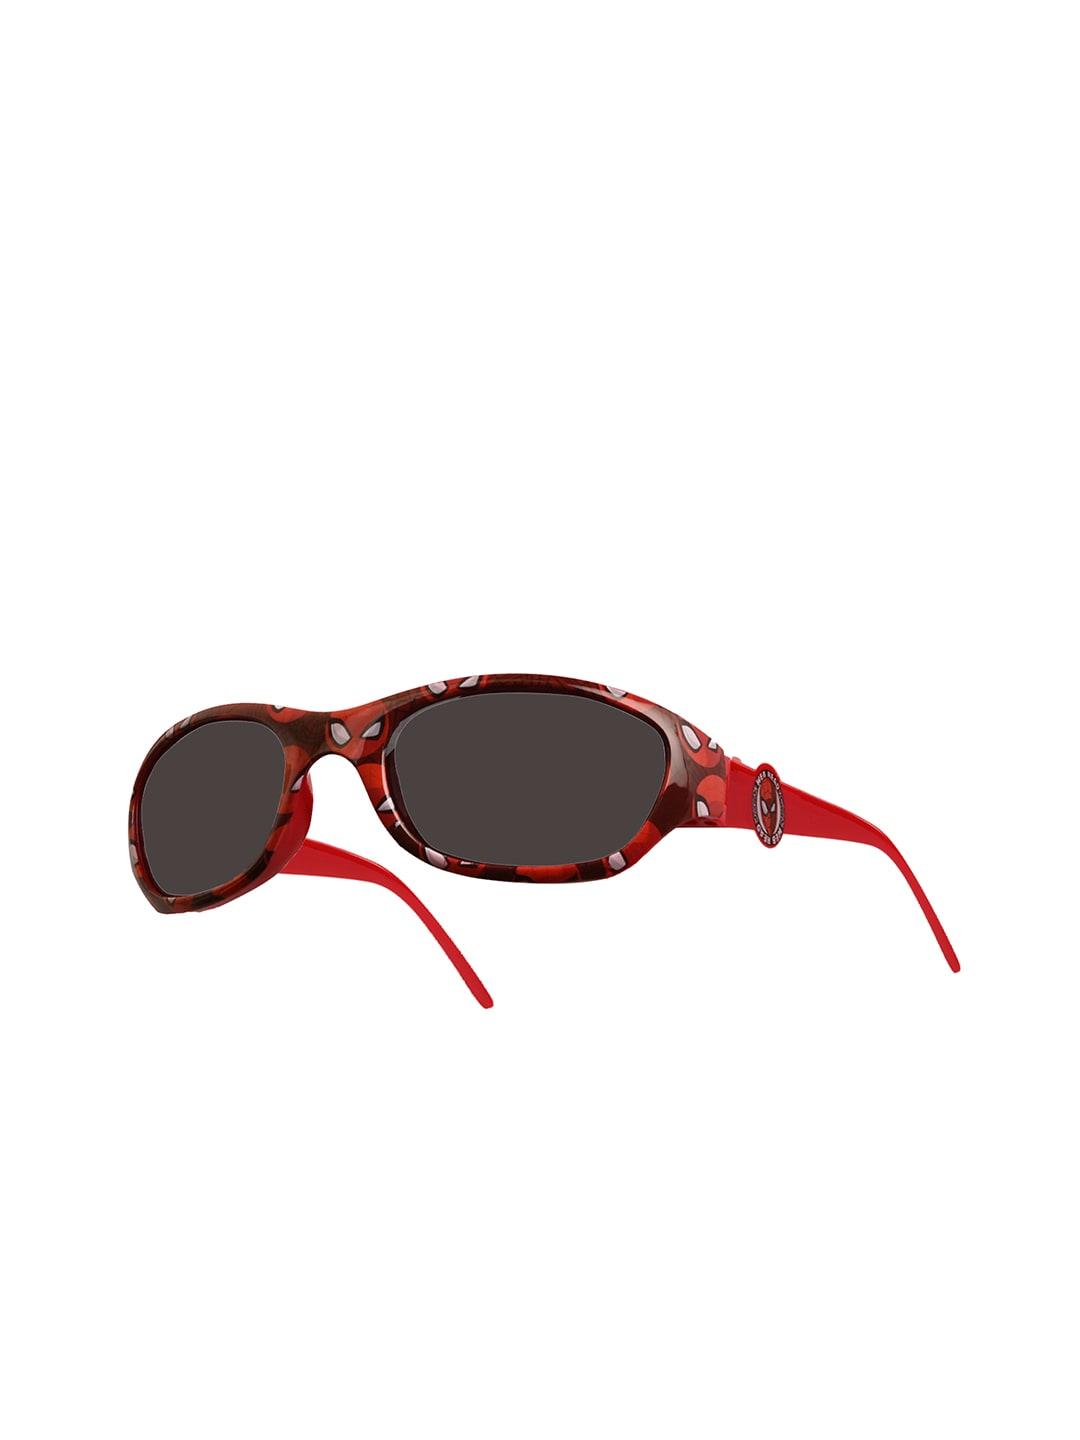 marvel-boys-grey-lens-&-red-oval-sunglasses-with-polarised-and-uv-protected-lens